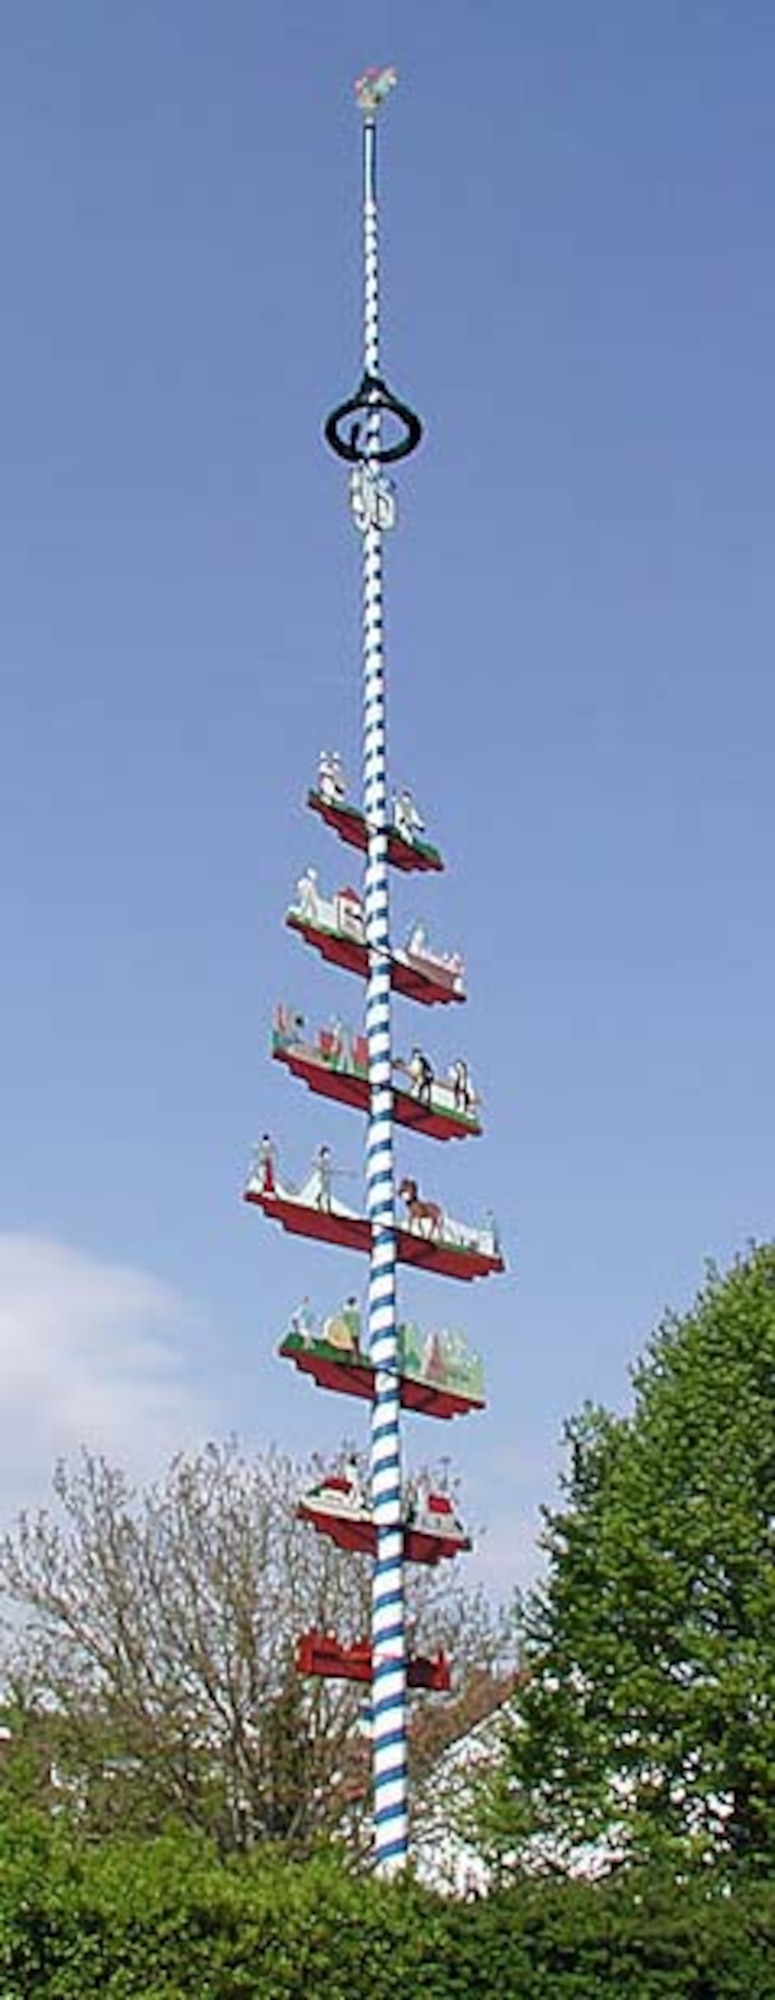 MARKTL, Bavaria -- This blue and white striped May pole in Marktl, Bavaria is a typical example of a Bavarian May tree. A May pole is a wooden pole made from a tree trunk of pine or birch, typically decorated with colorful ribbons, flowers, carved figures and various other decorations, depending on regional tradition. (Courtesy photo)